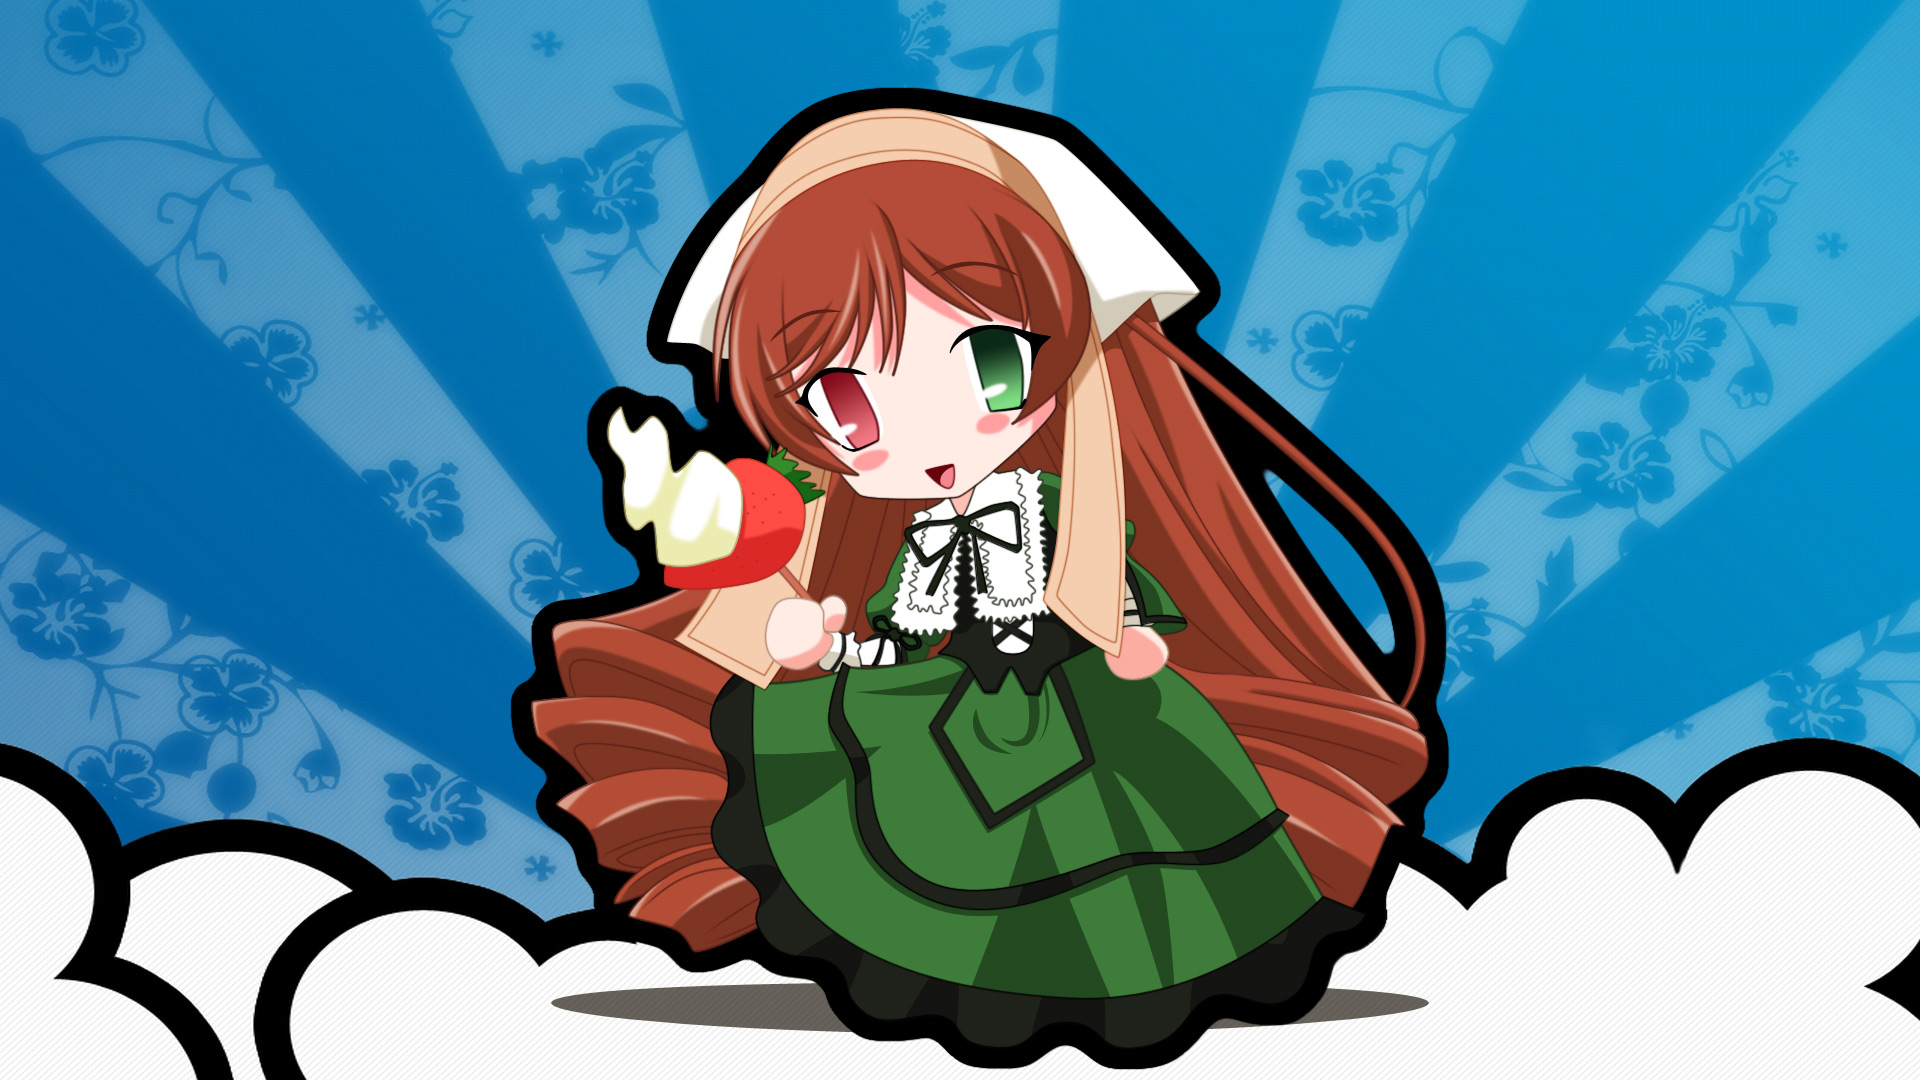 Suiseiseki from Rozen Maiden, a character with green hair, holding a watering can in a garden.